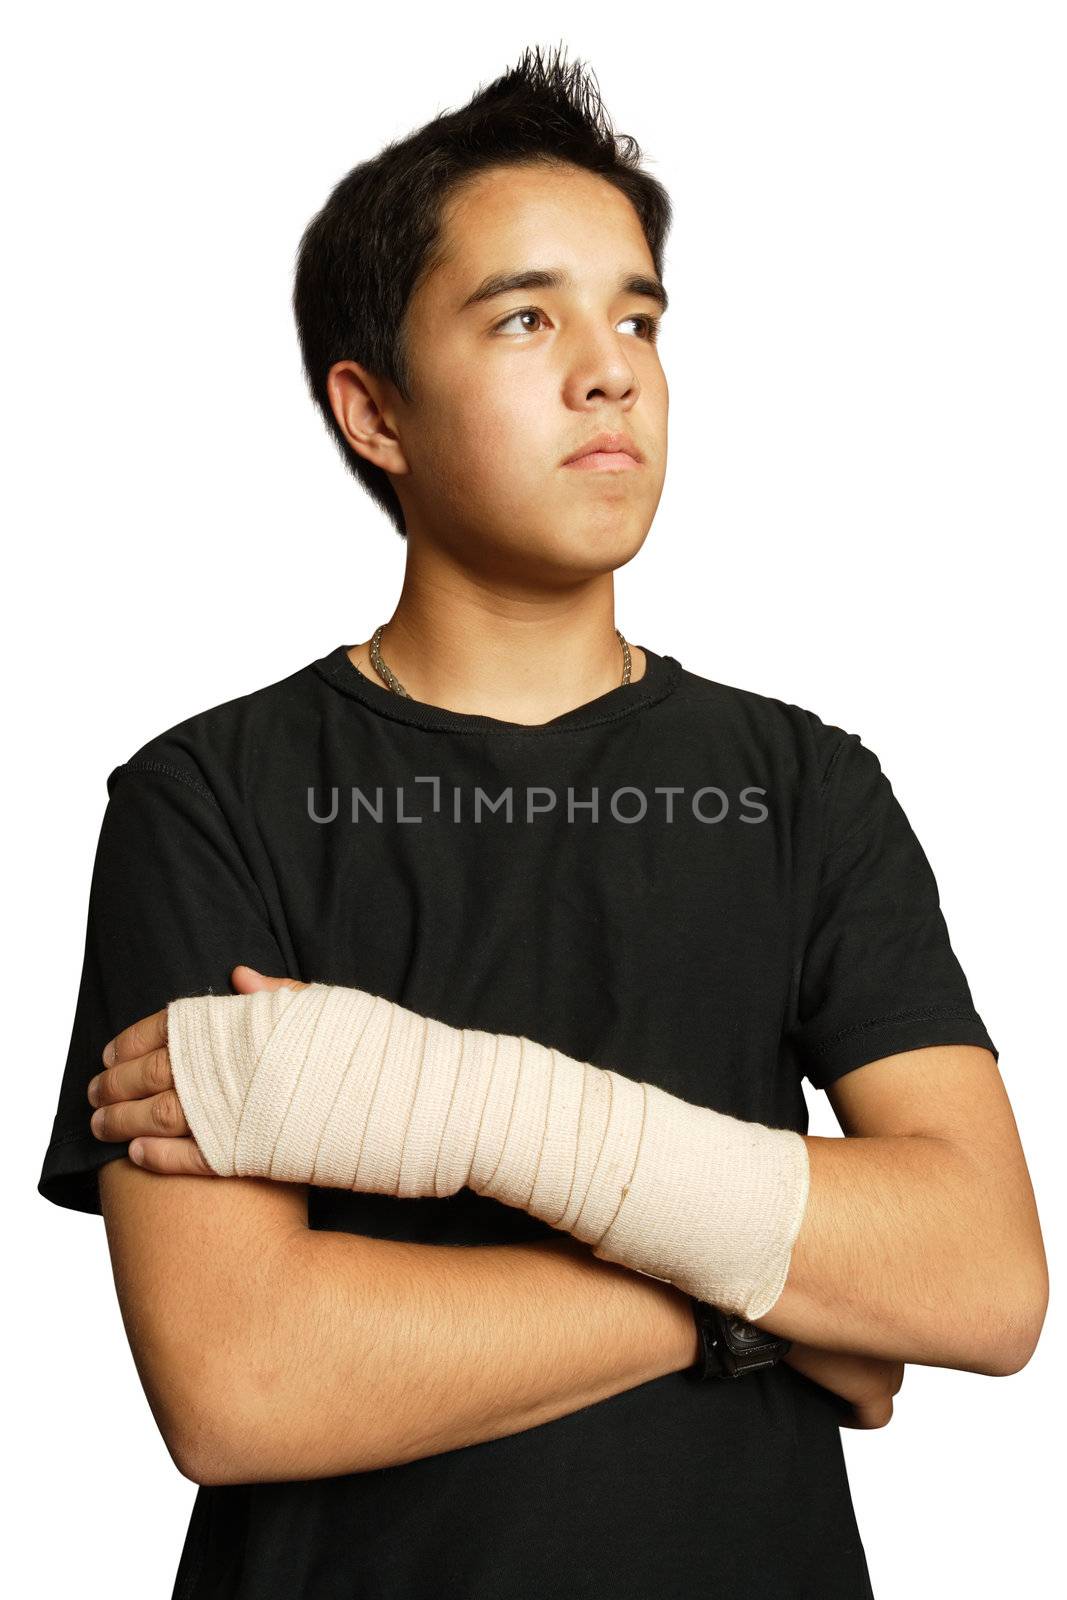 An injured Asian teenager with a medical bandage wrapped around his arm.
